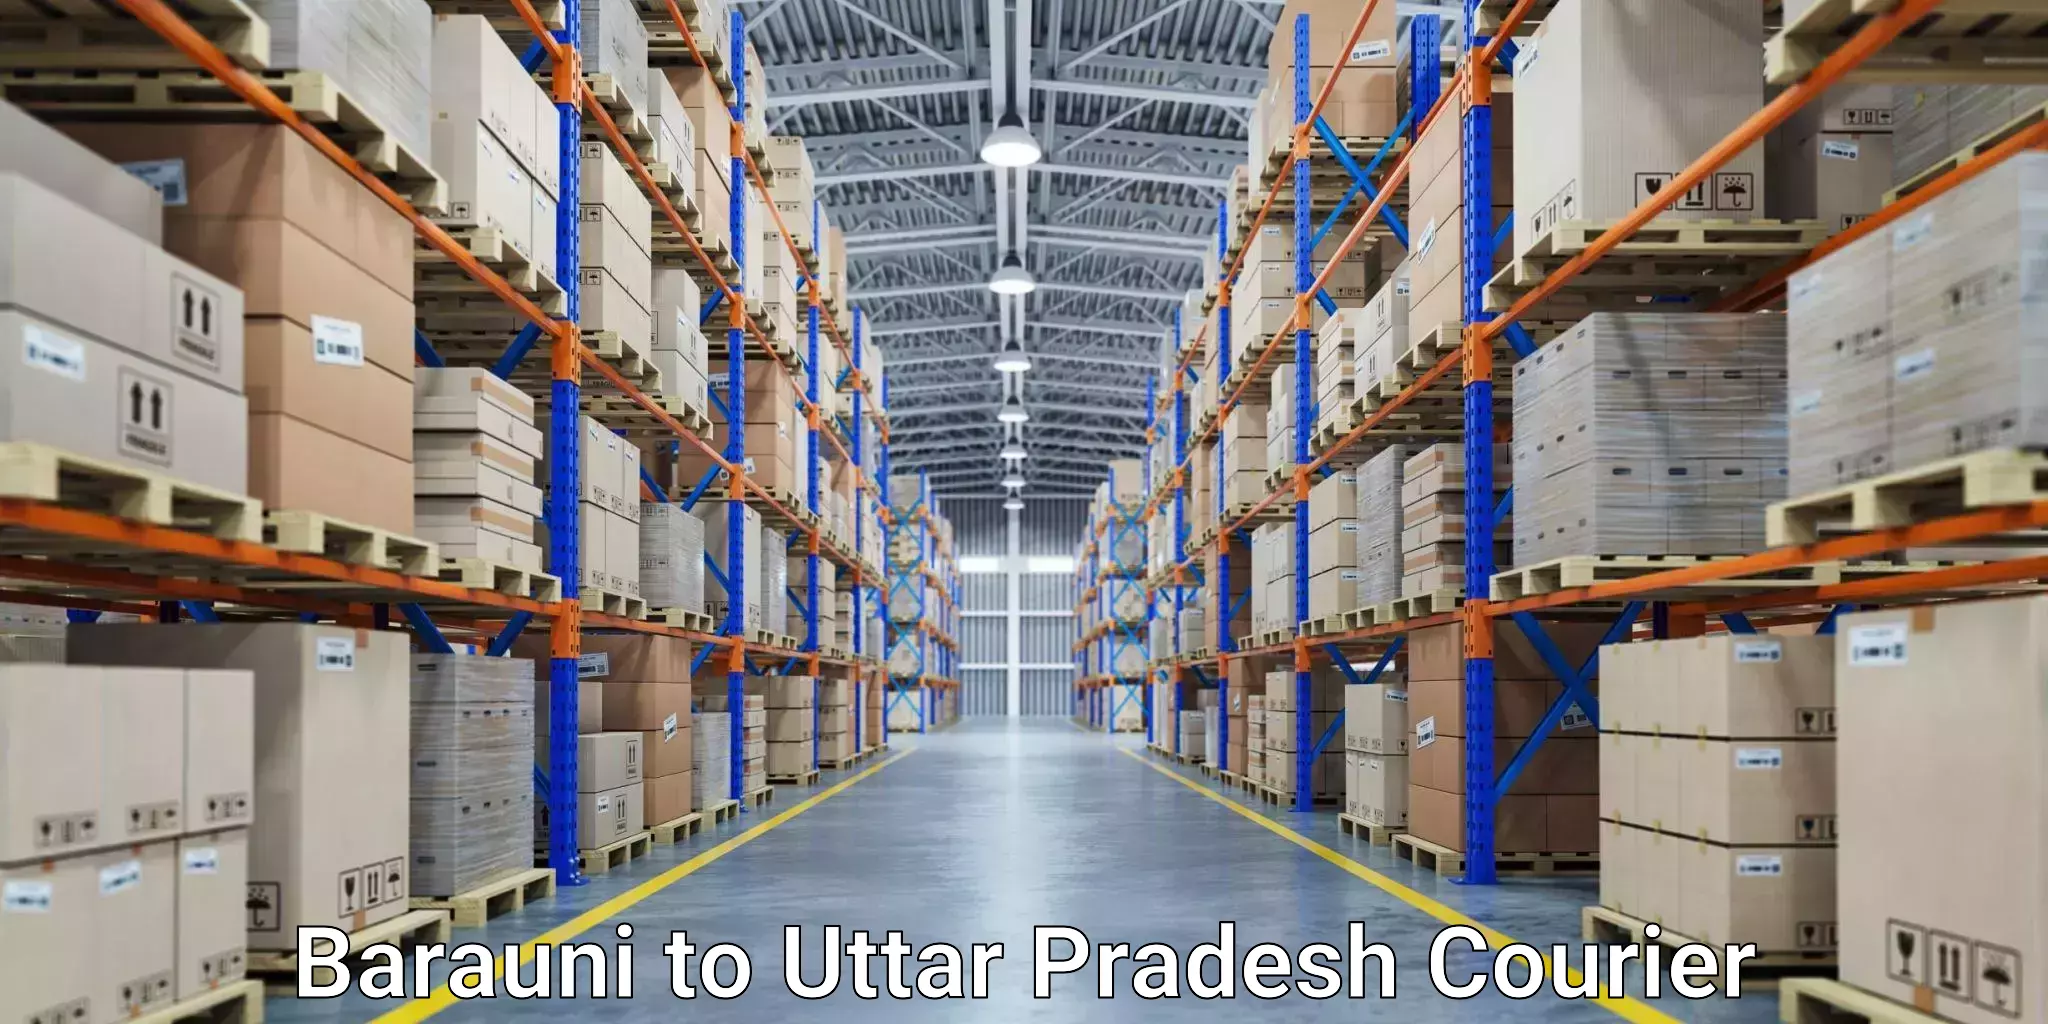 Package delivery network Barauni to Uttar Pradesh